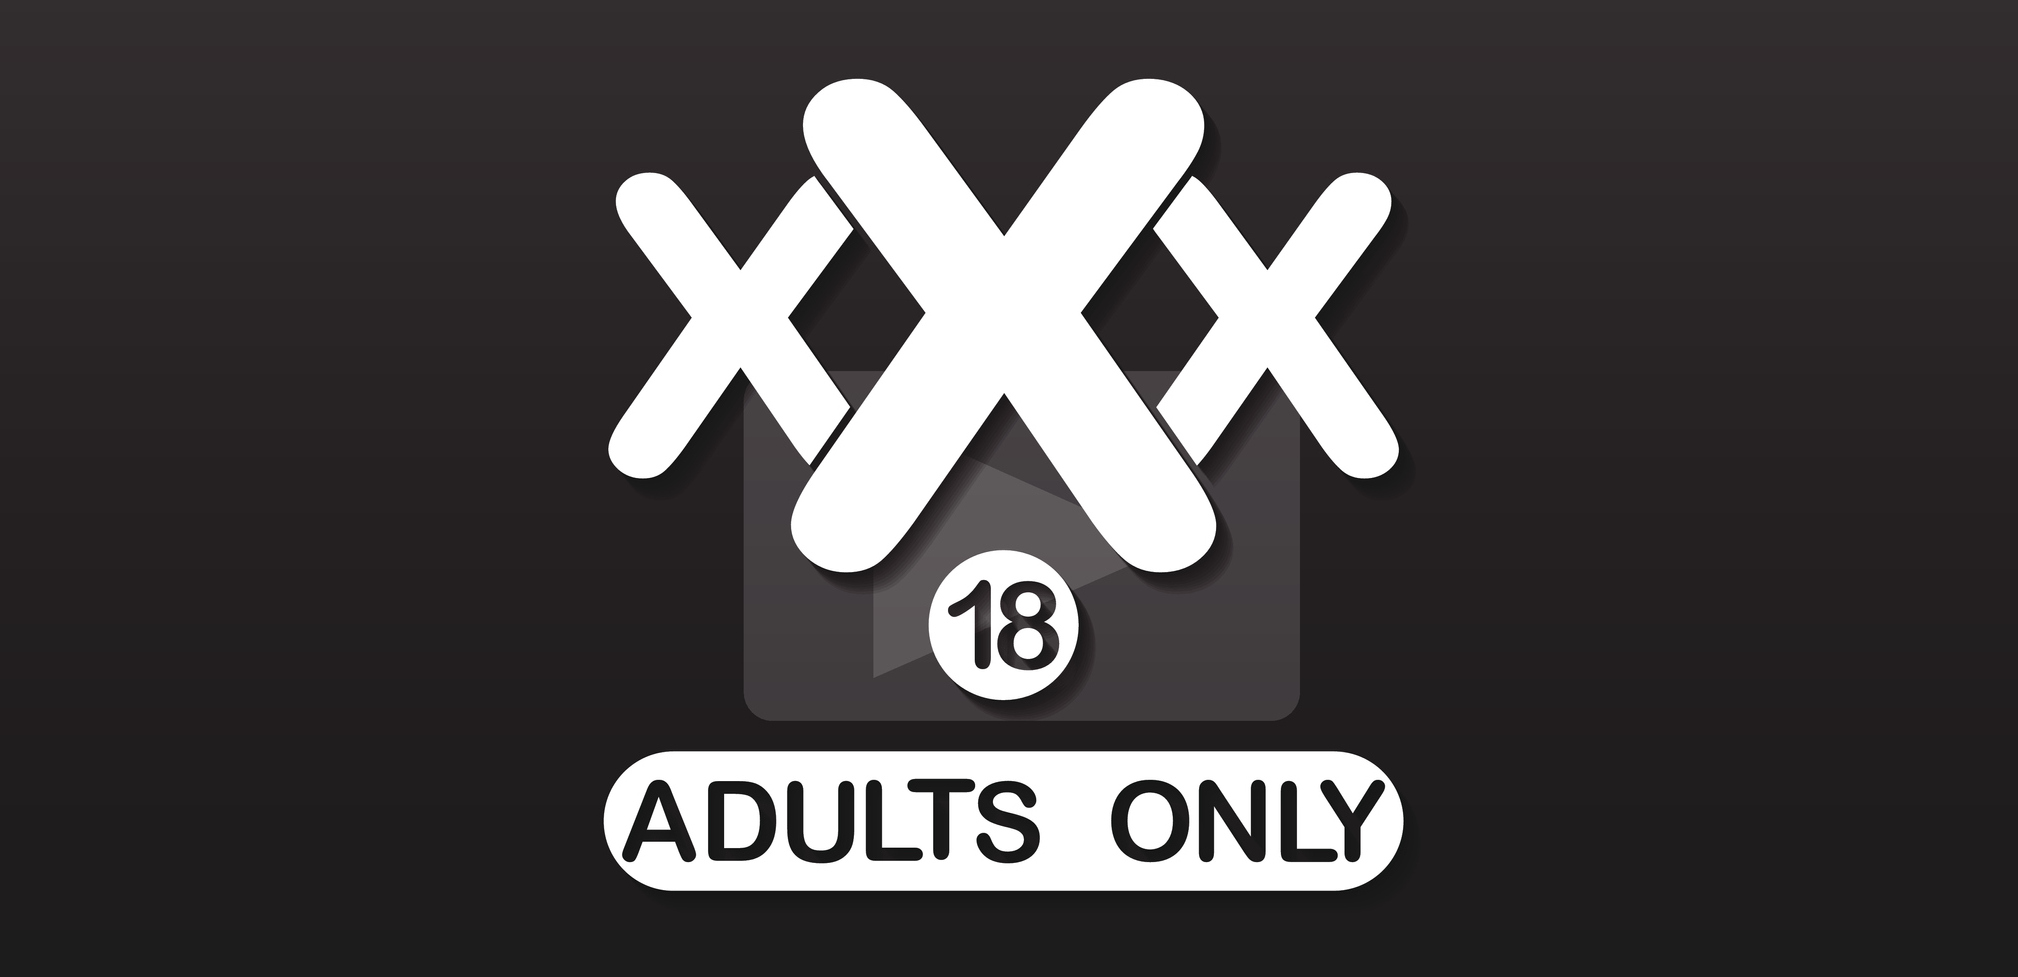 X 18 adults only